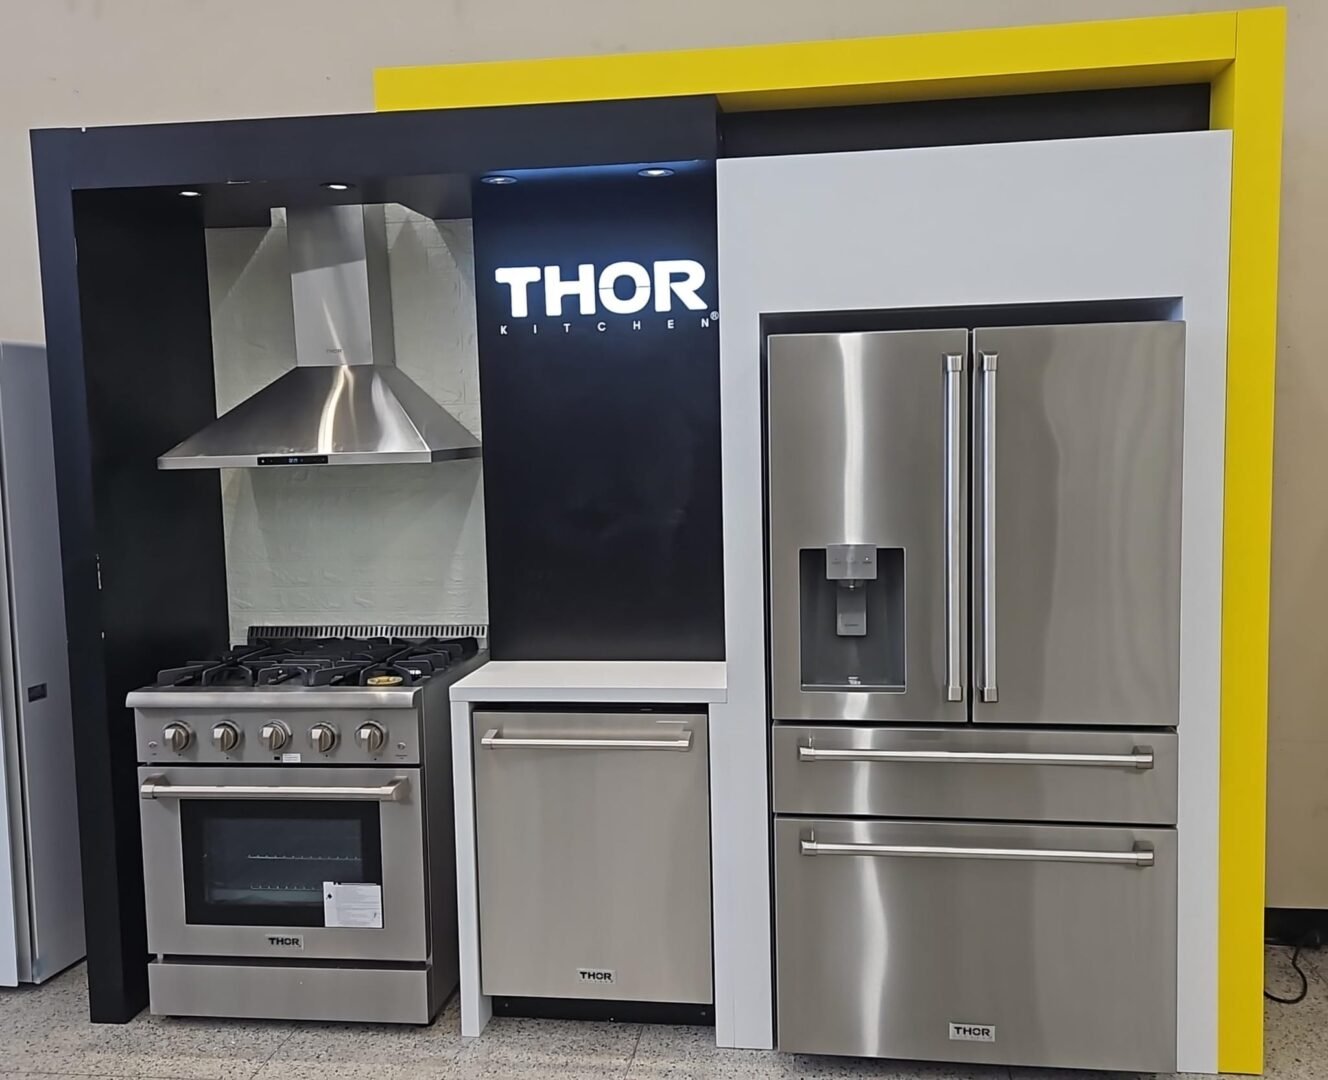 New In Box Stainless Thor Appliances Package